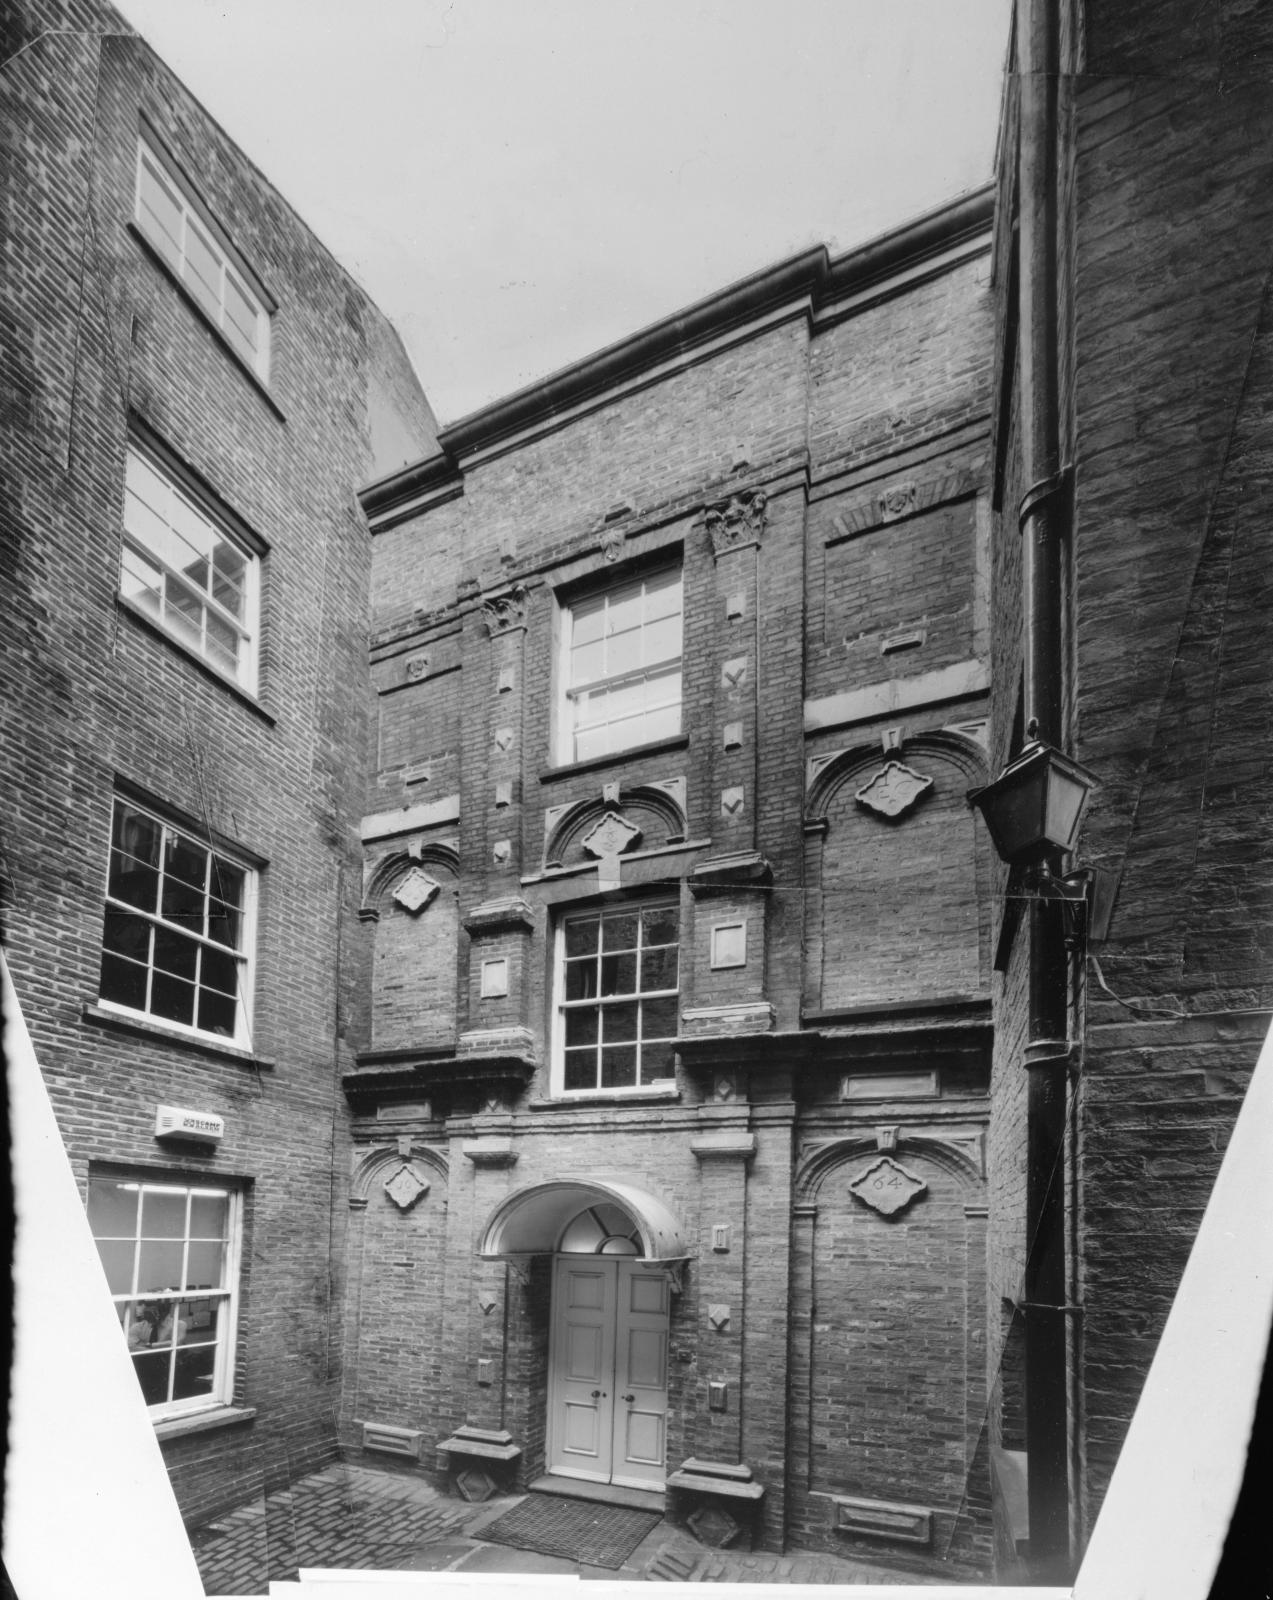 Archive image of Crowle House